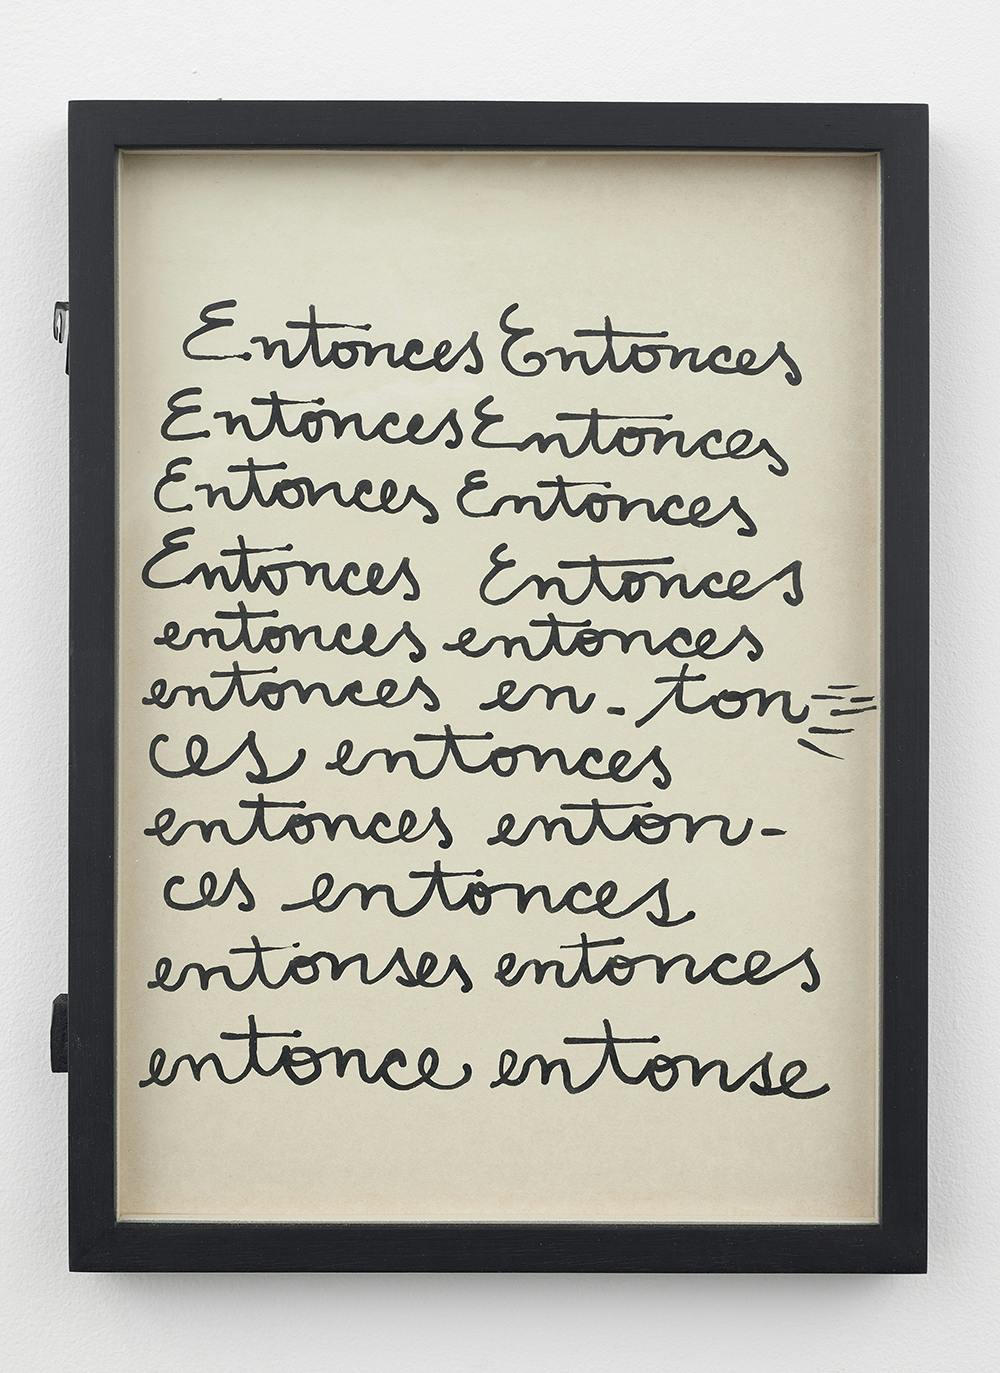 Framed, hand-painted note with the word "entonces" repeated throughout the page.